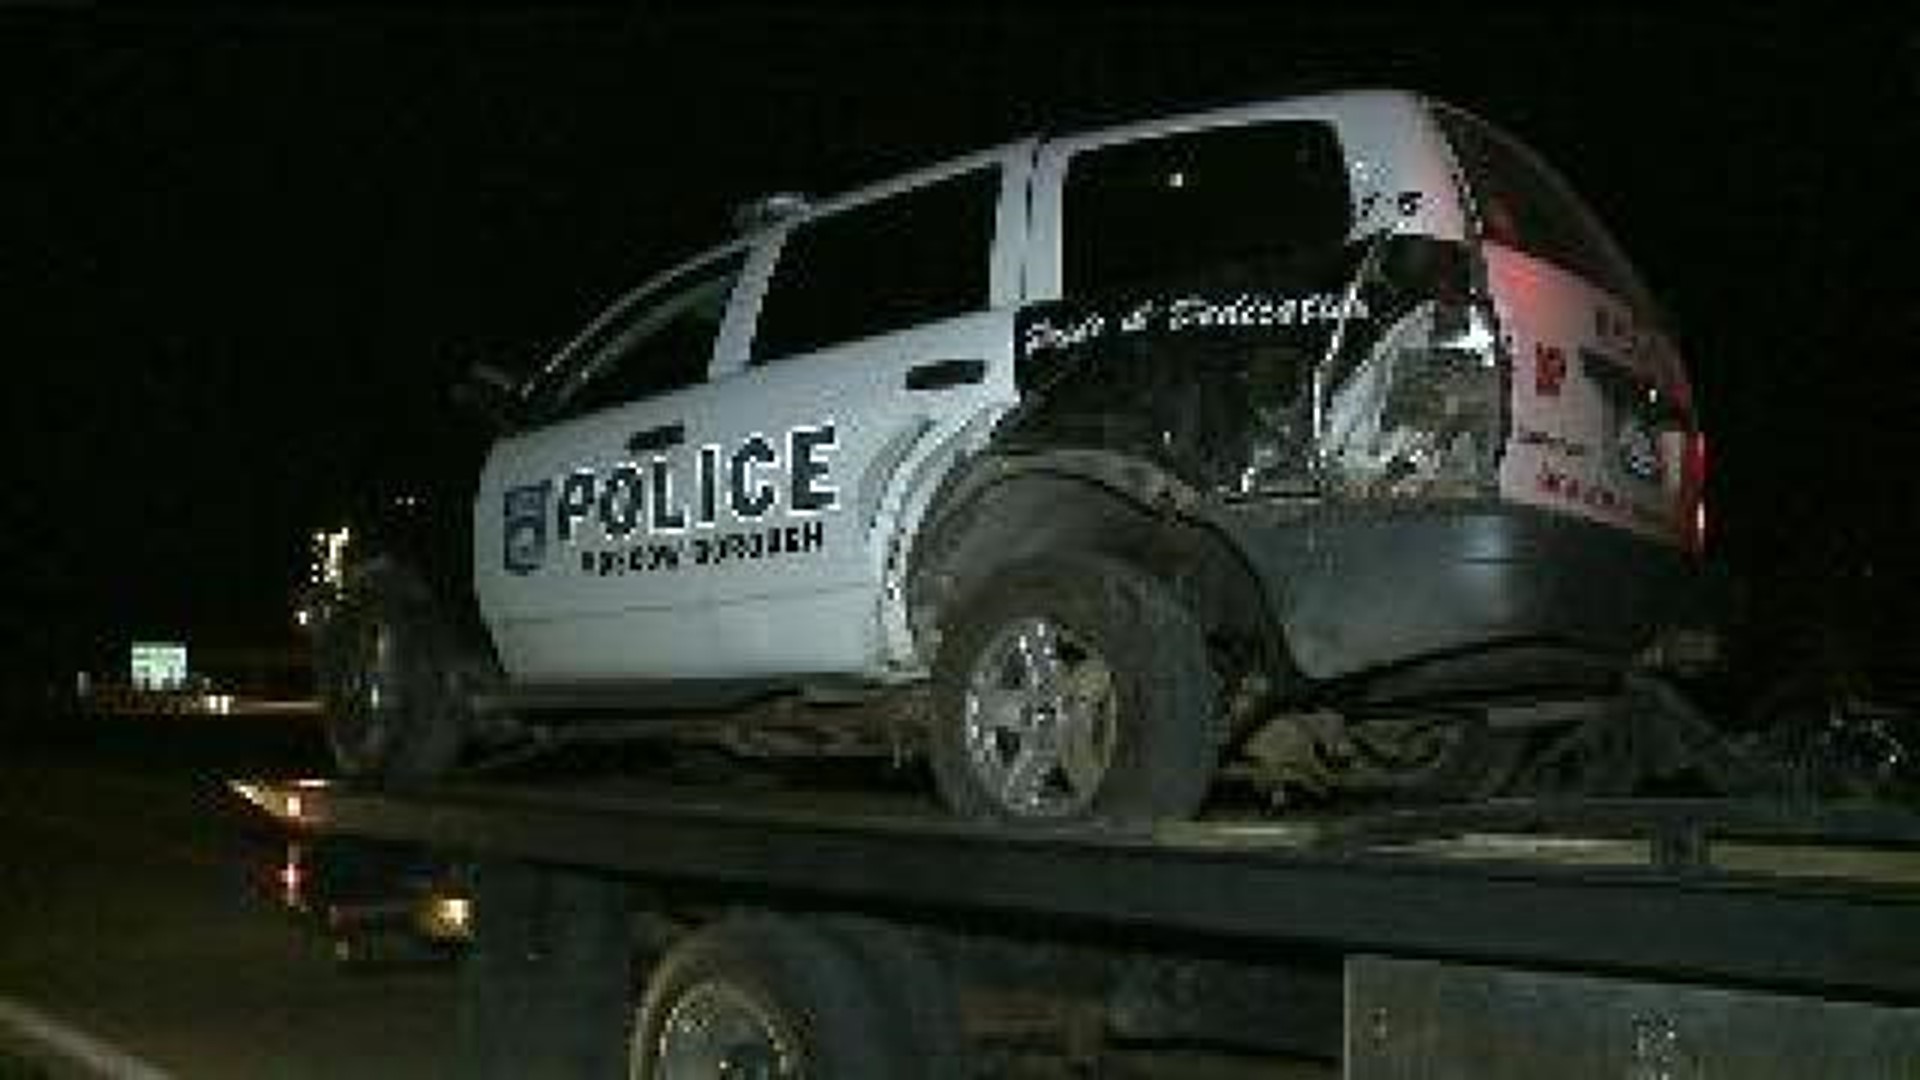 Moscow Police Car Damaged in Crash